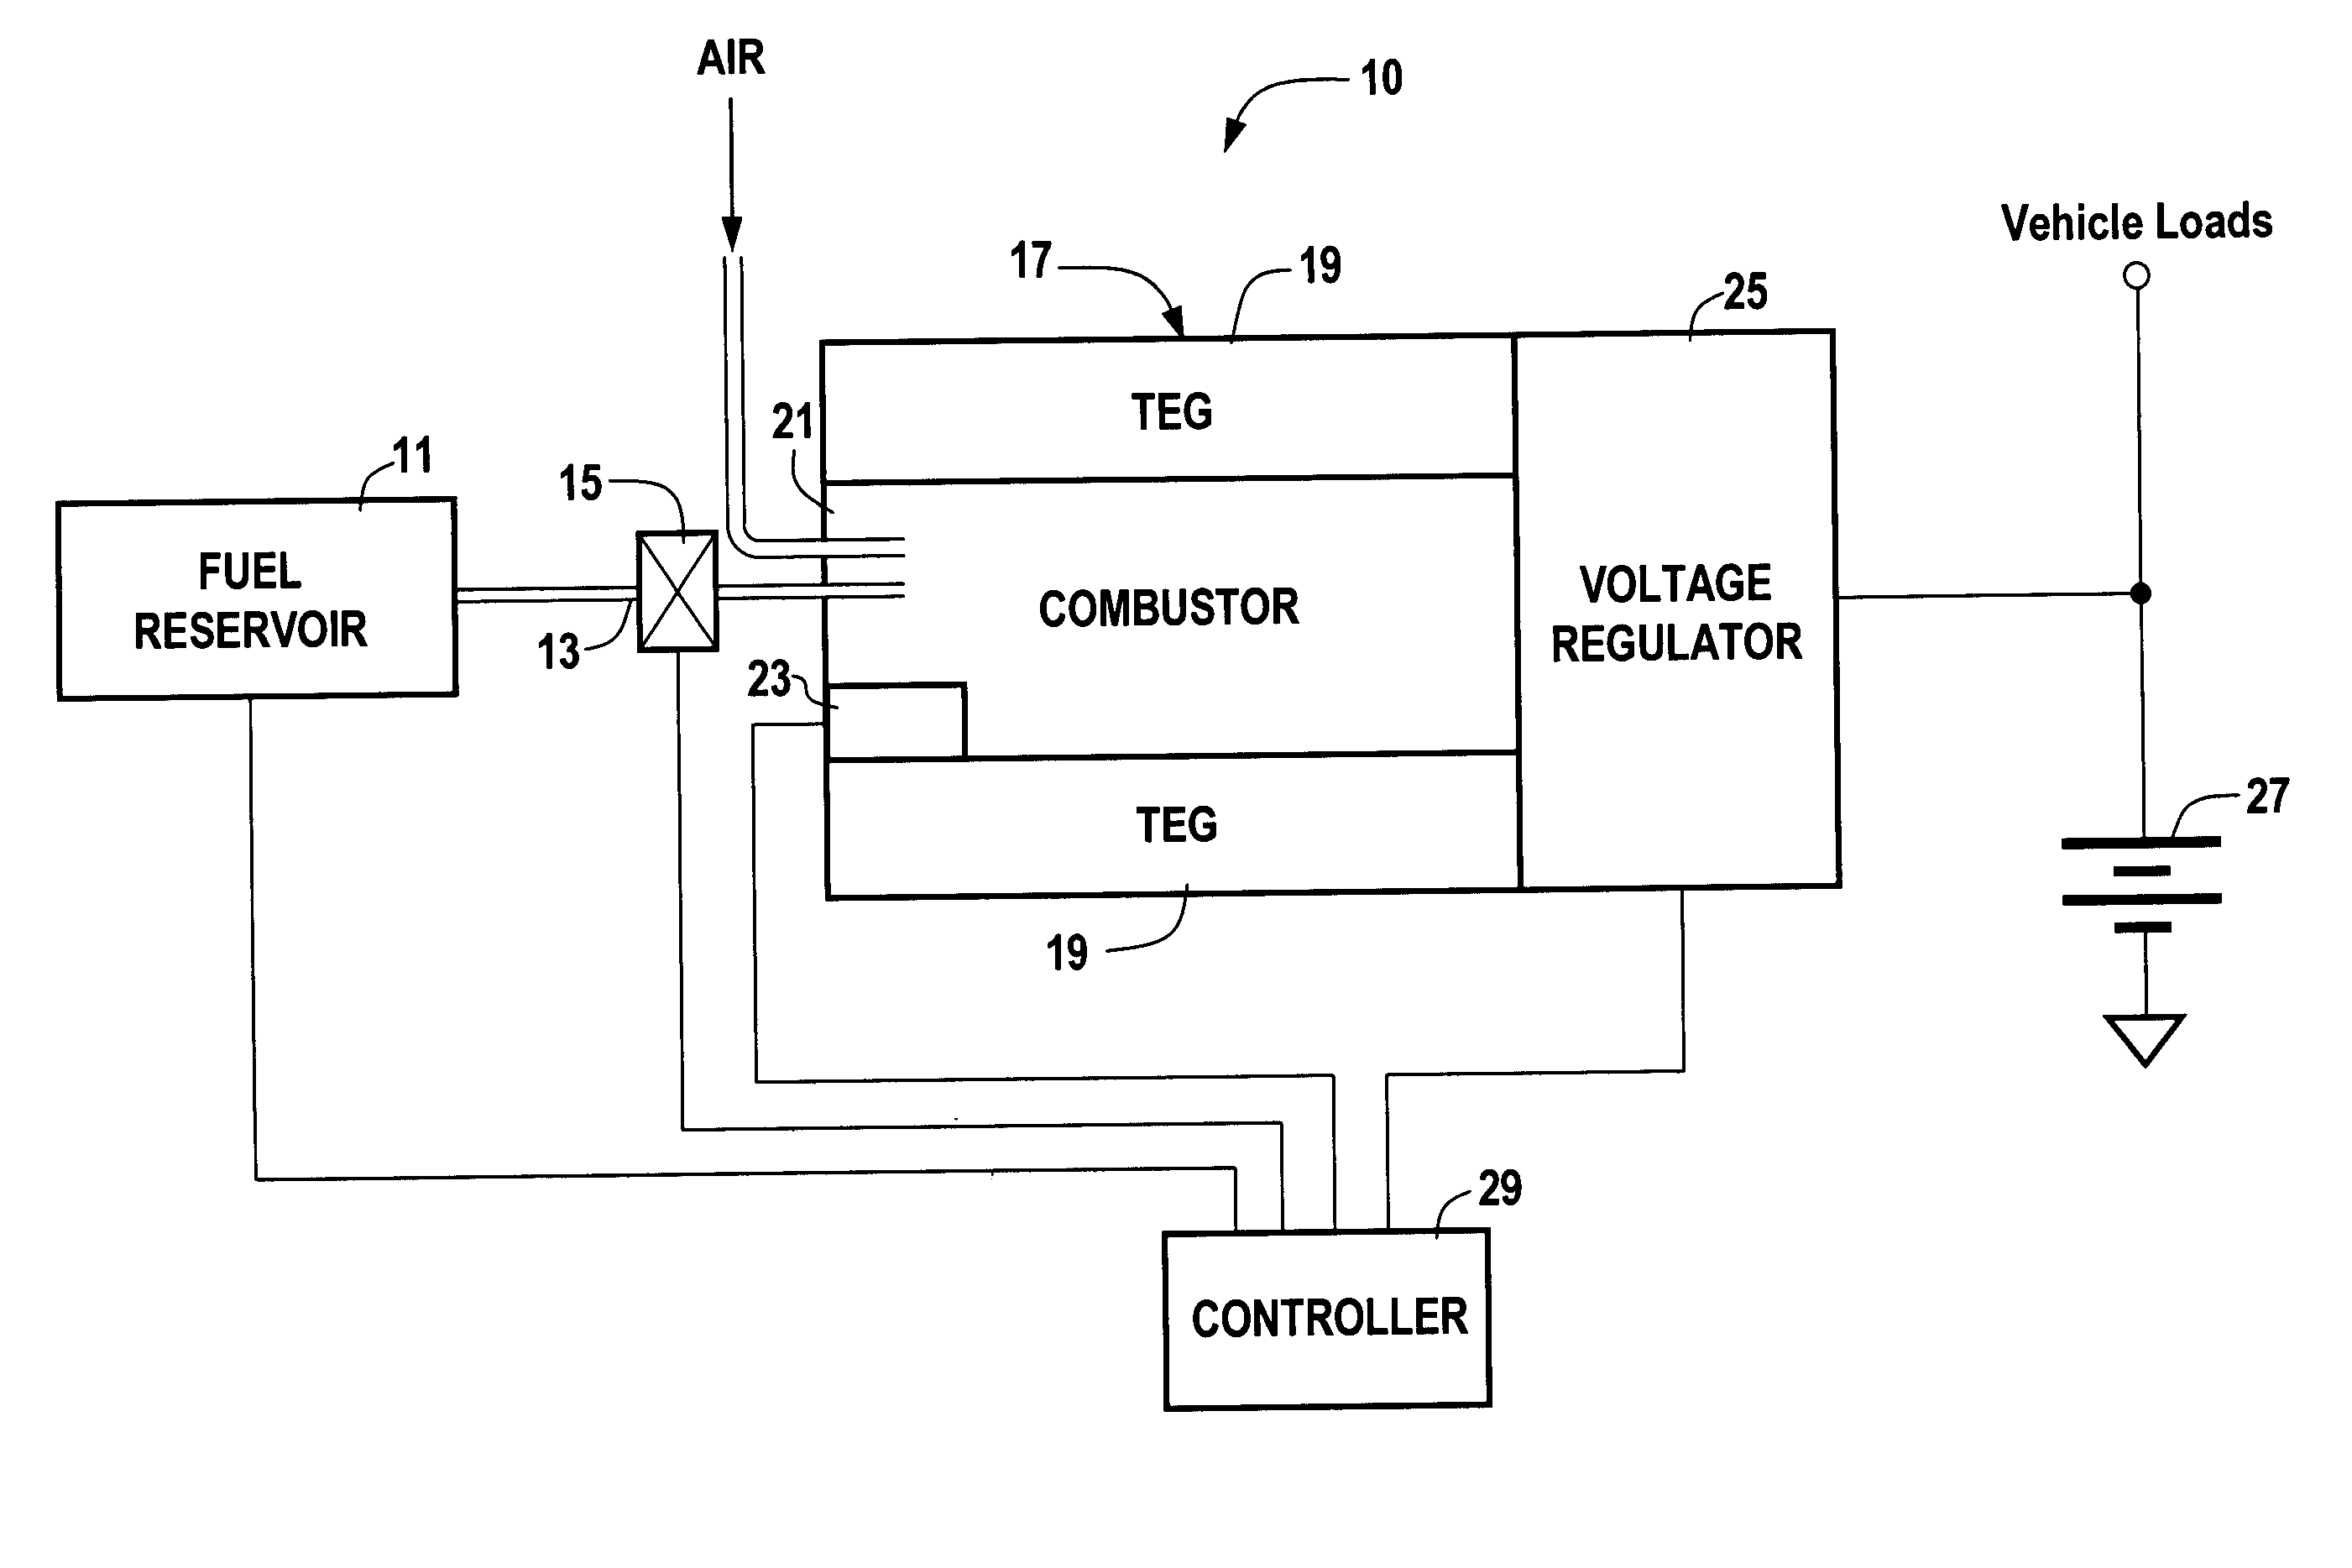 Auxiliary electrical power generation